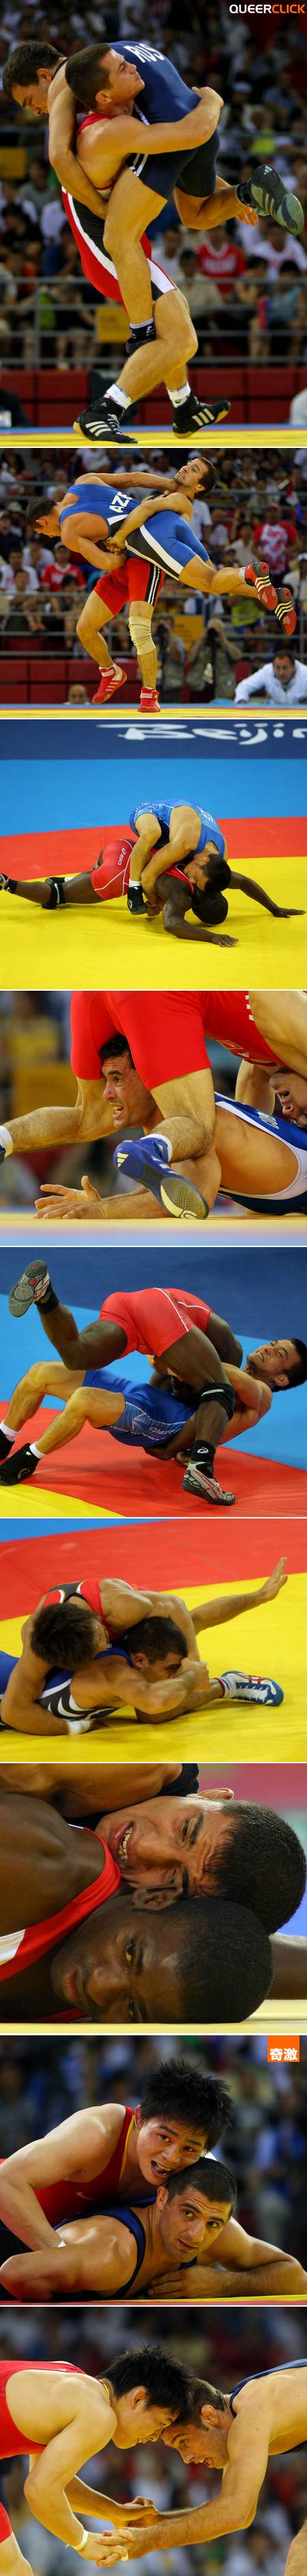 Olympic Hotties Day 4 Wrestlers